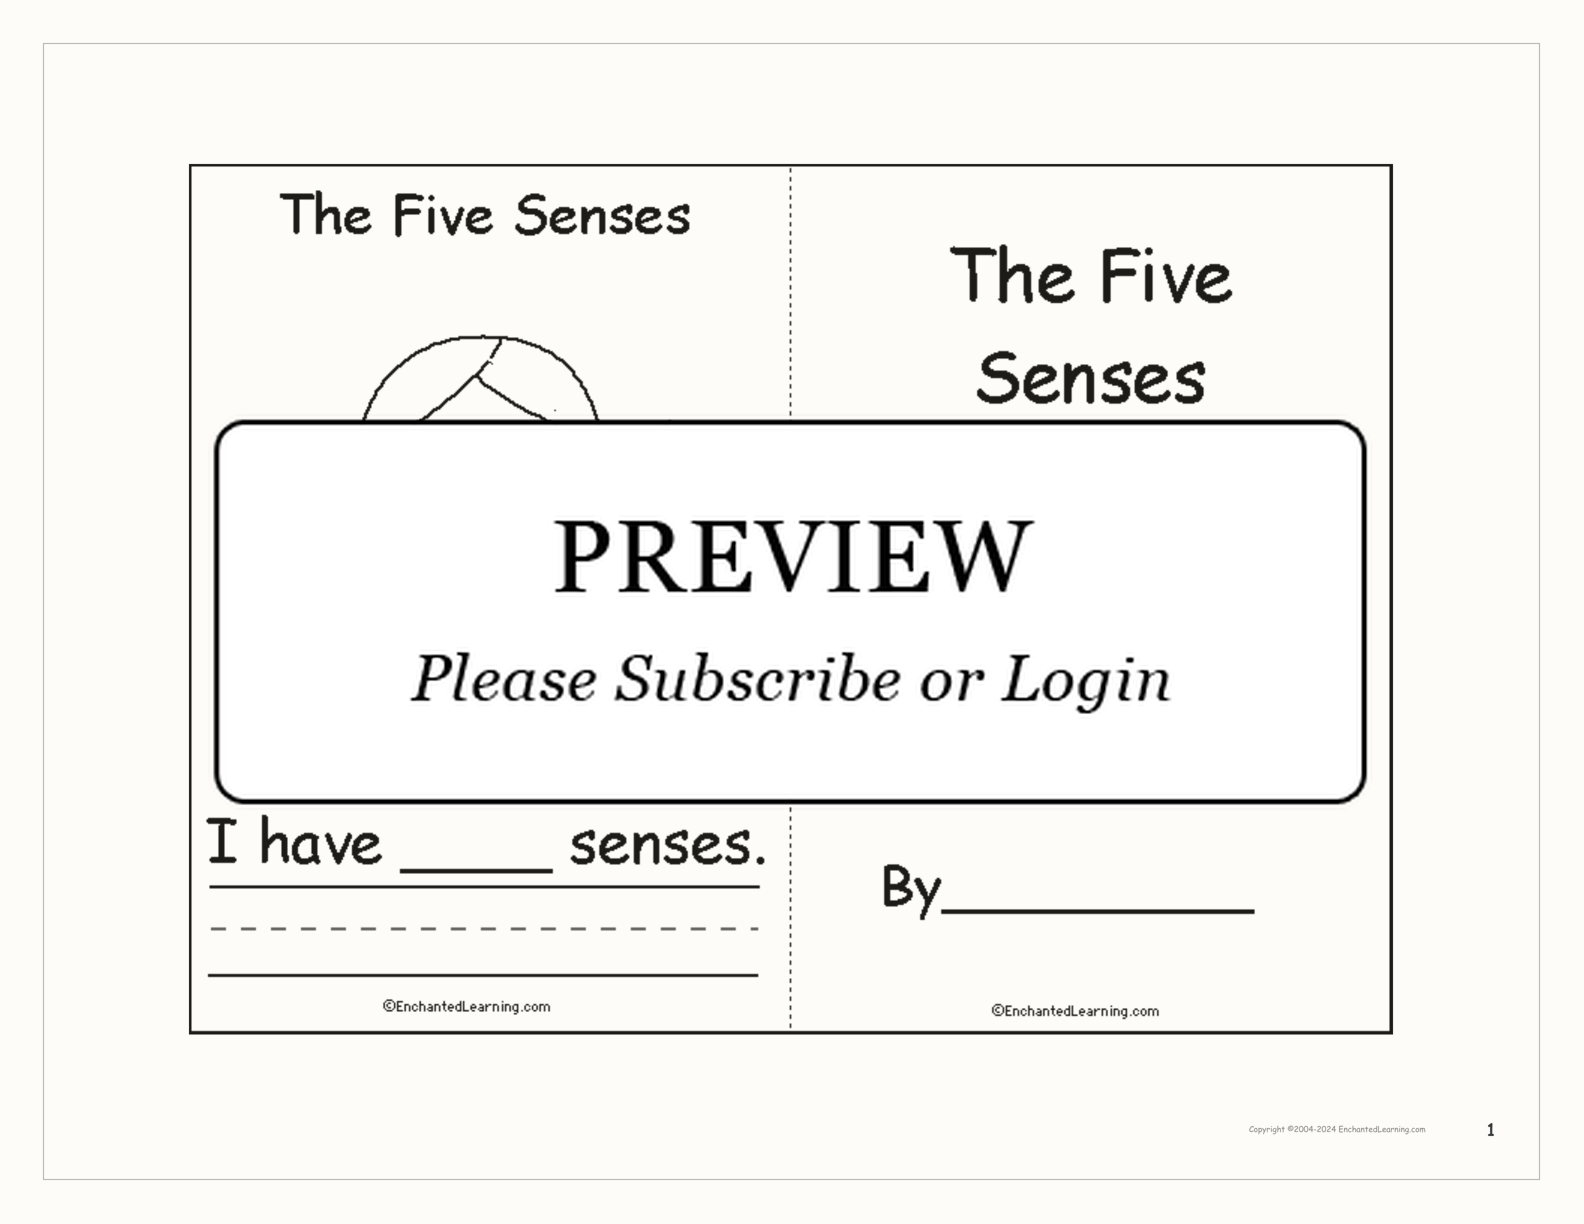 The Five Senses - Printable Book interactive worksheet page 1